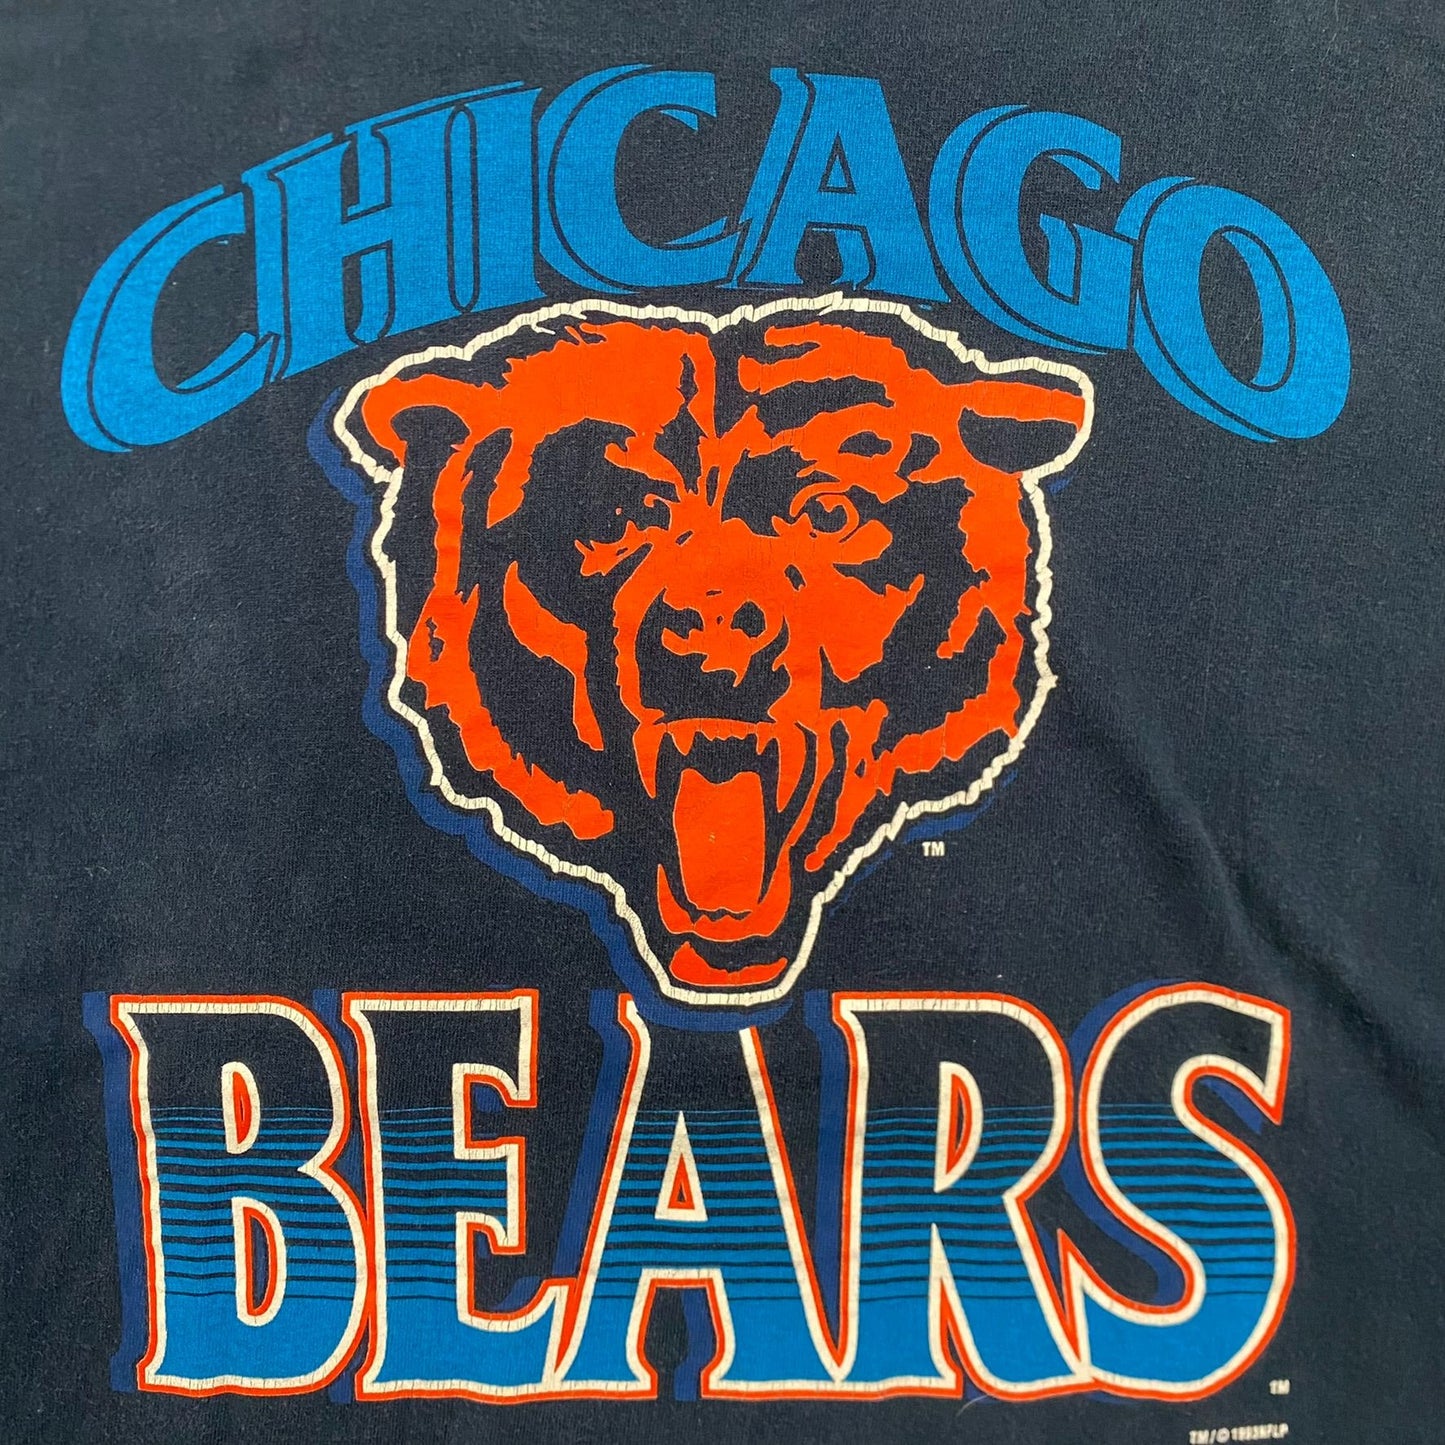 Vintage 90s Chicago Bears Football Baggy NFL Sports Tee